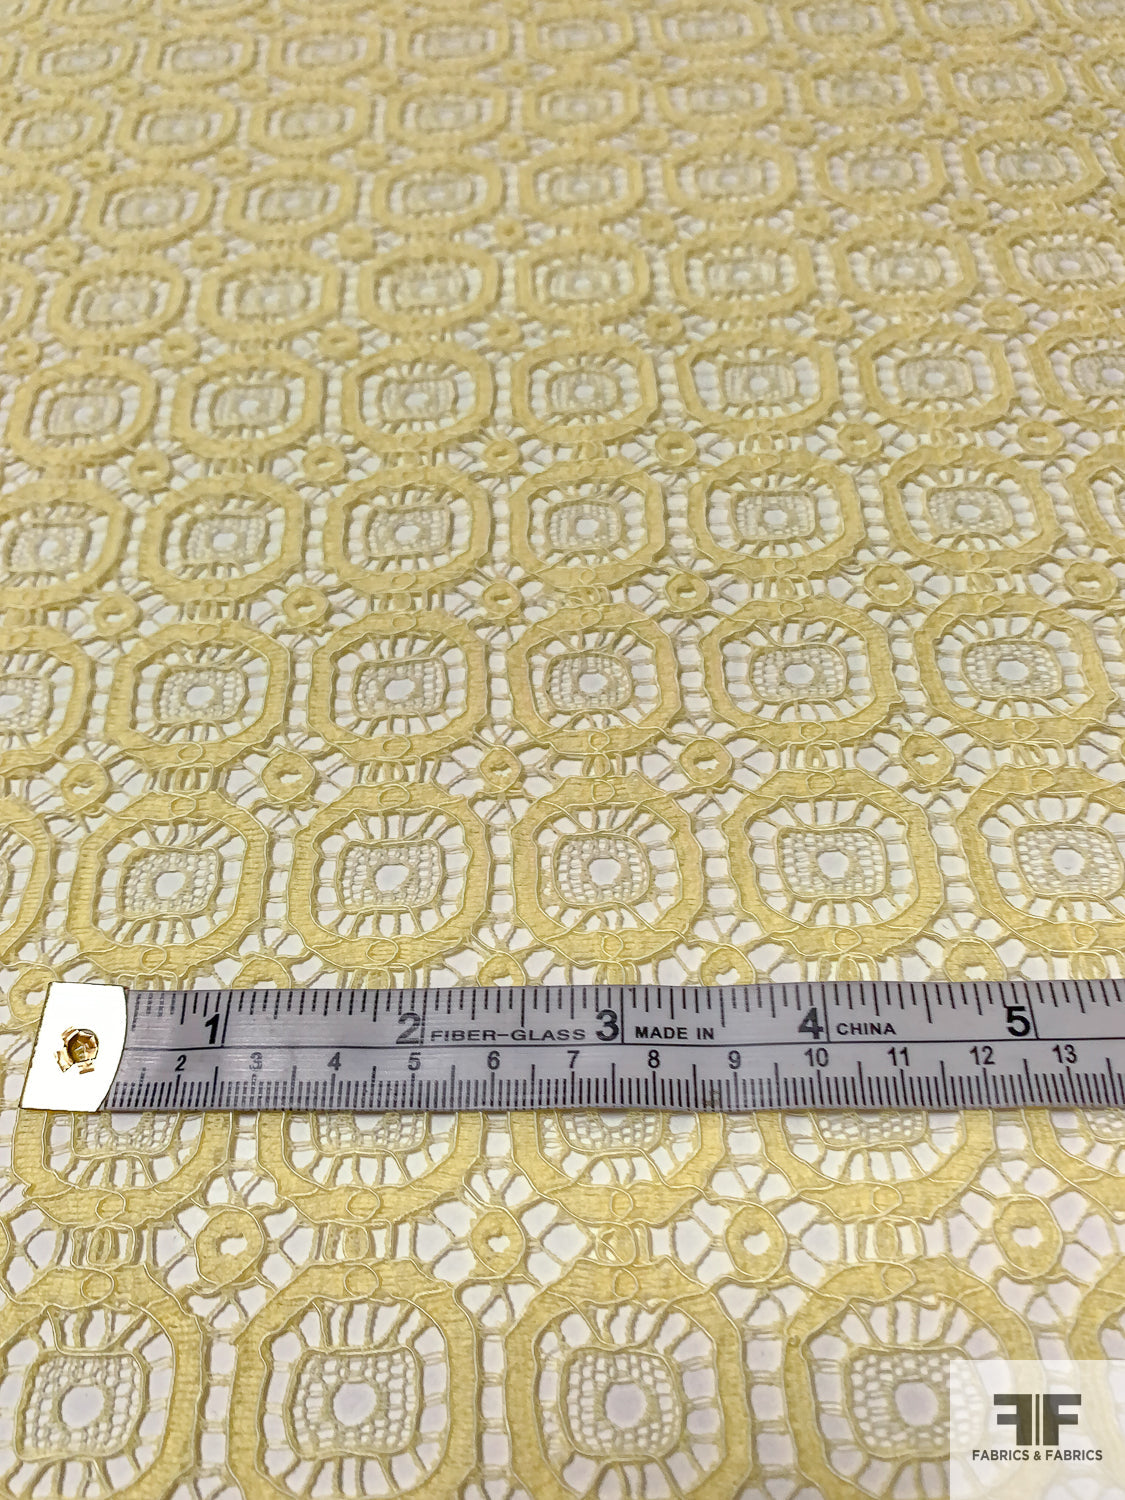 SALE Stretch Geometric Lace Fabric 5921 White, by the yard